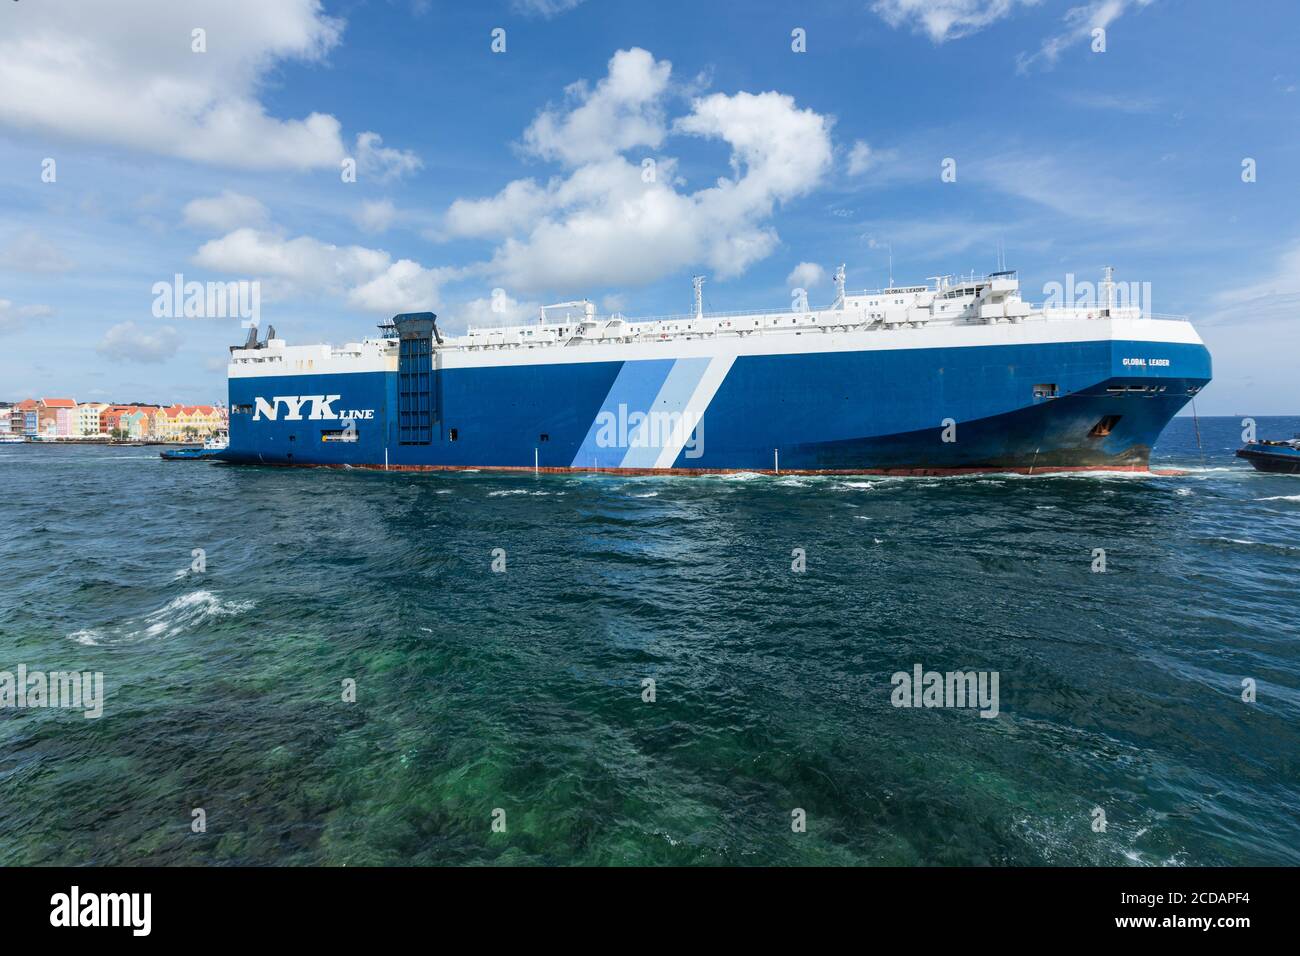 The Global Leader, a roll-on/roll-off vehicle carrier of the NYK Line, at the mouth of the harbor at Willemstad, Curacao. Stock Photo